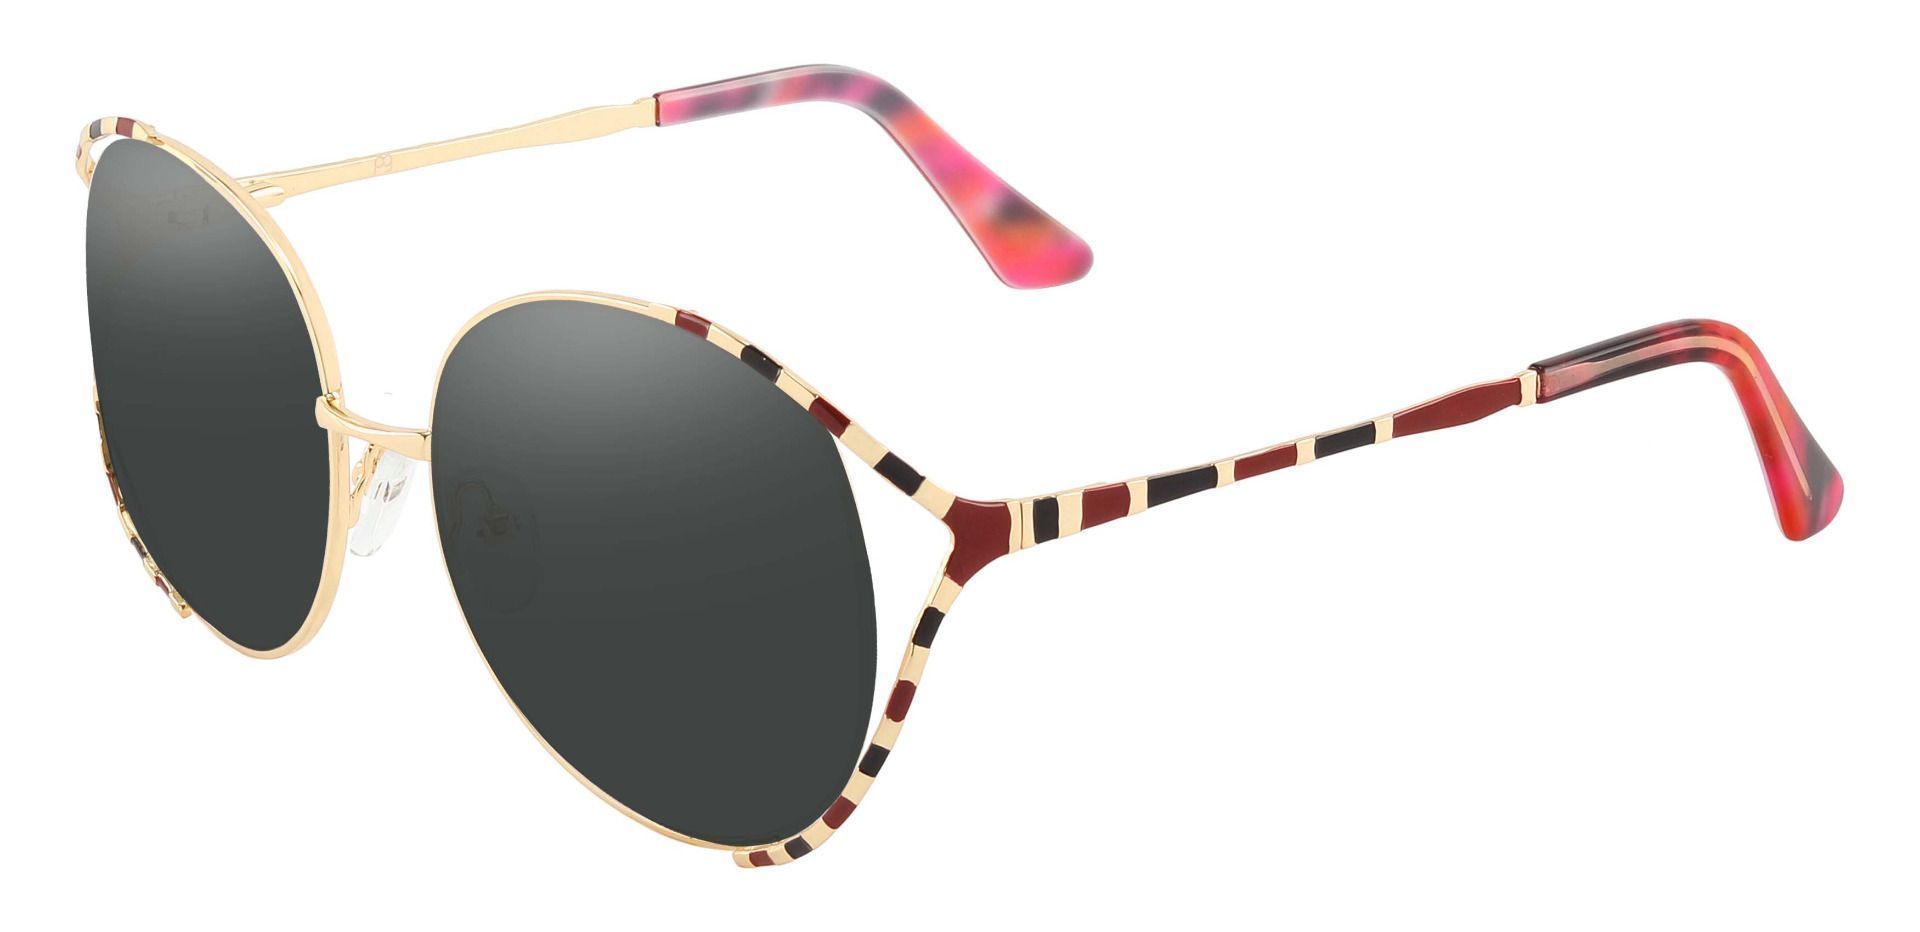 Dorothy Oval Non-Rx Sunglasses - Pink Frame With Gray Lenses